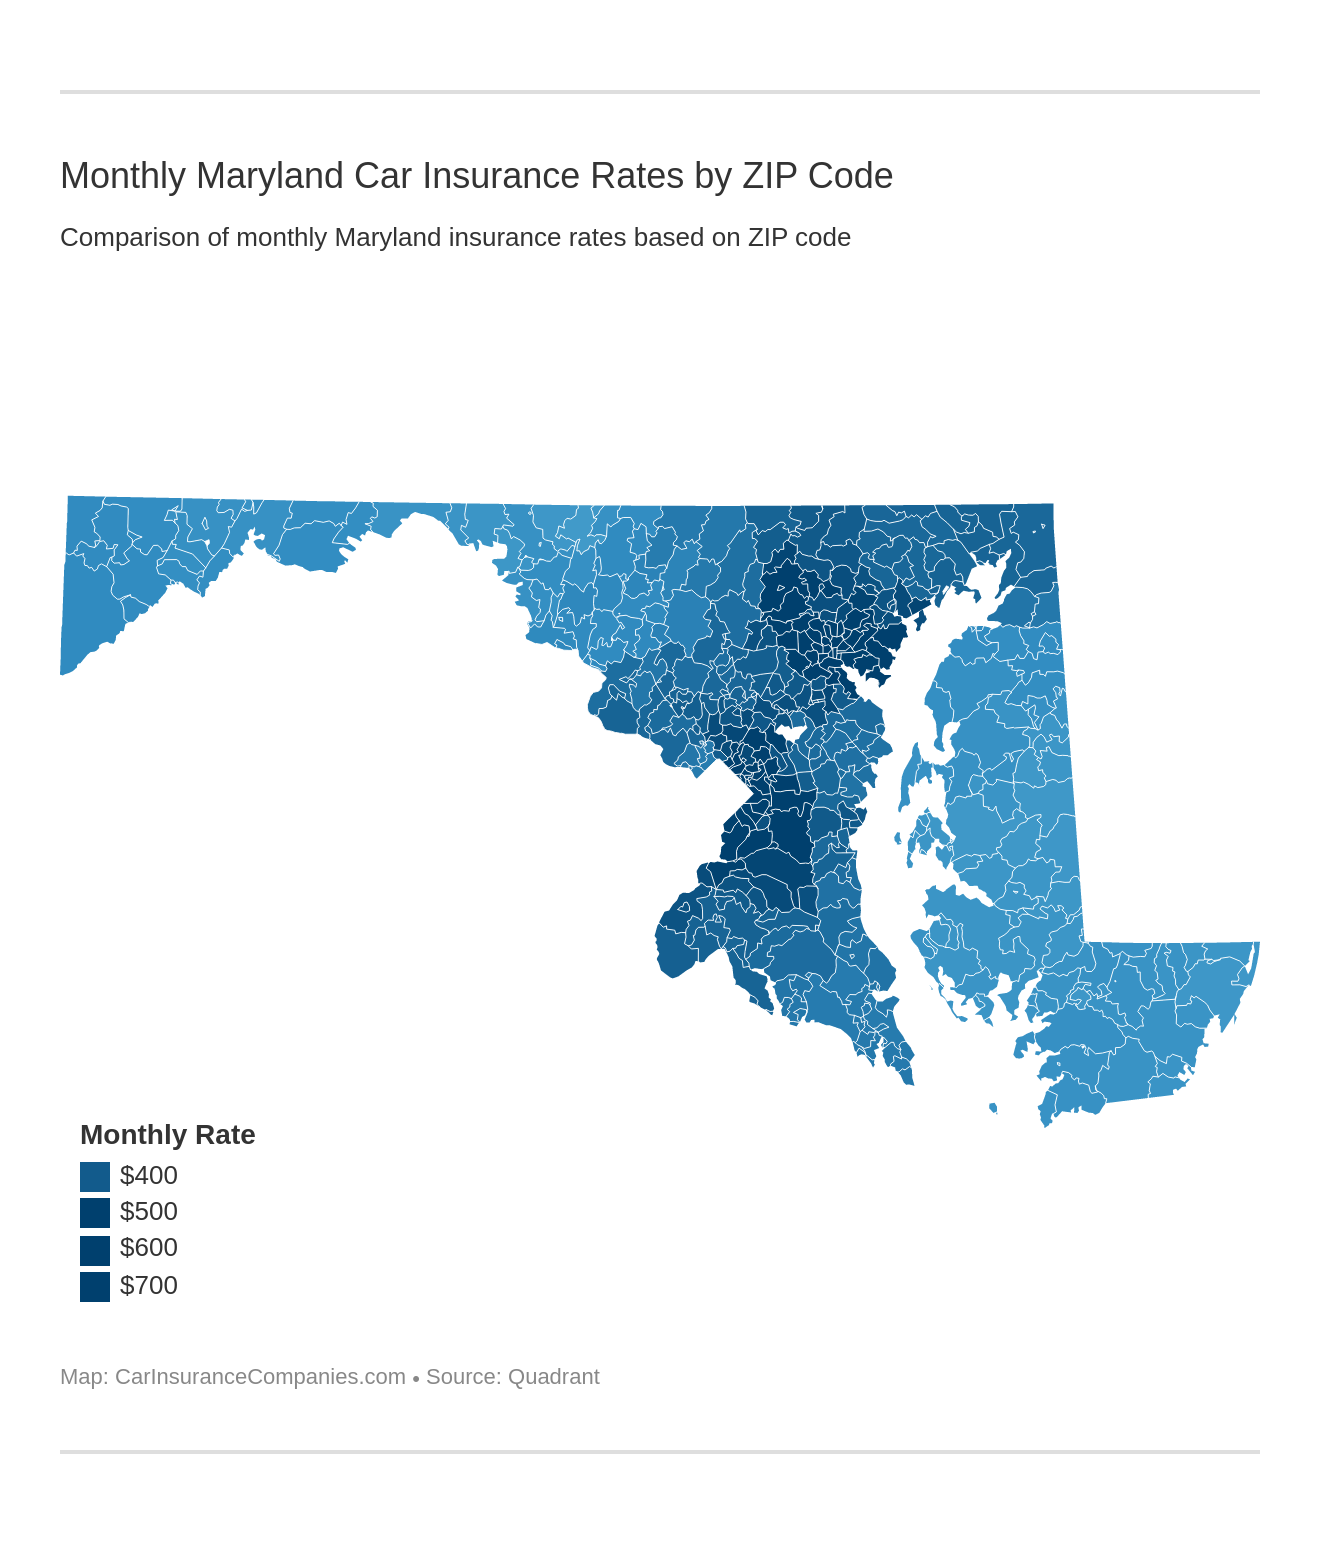 Monthly Maryland Car Insurance Rates by ZIP Code